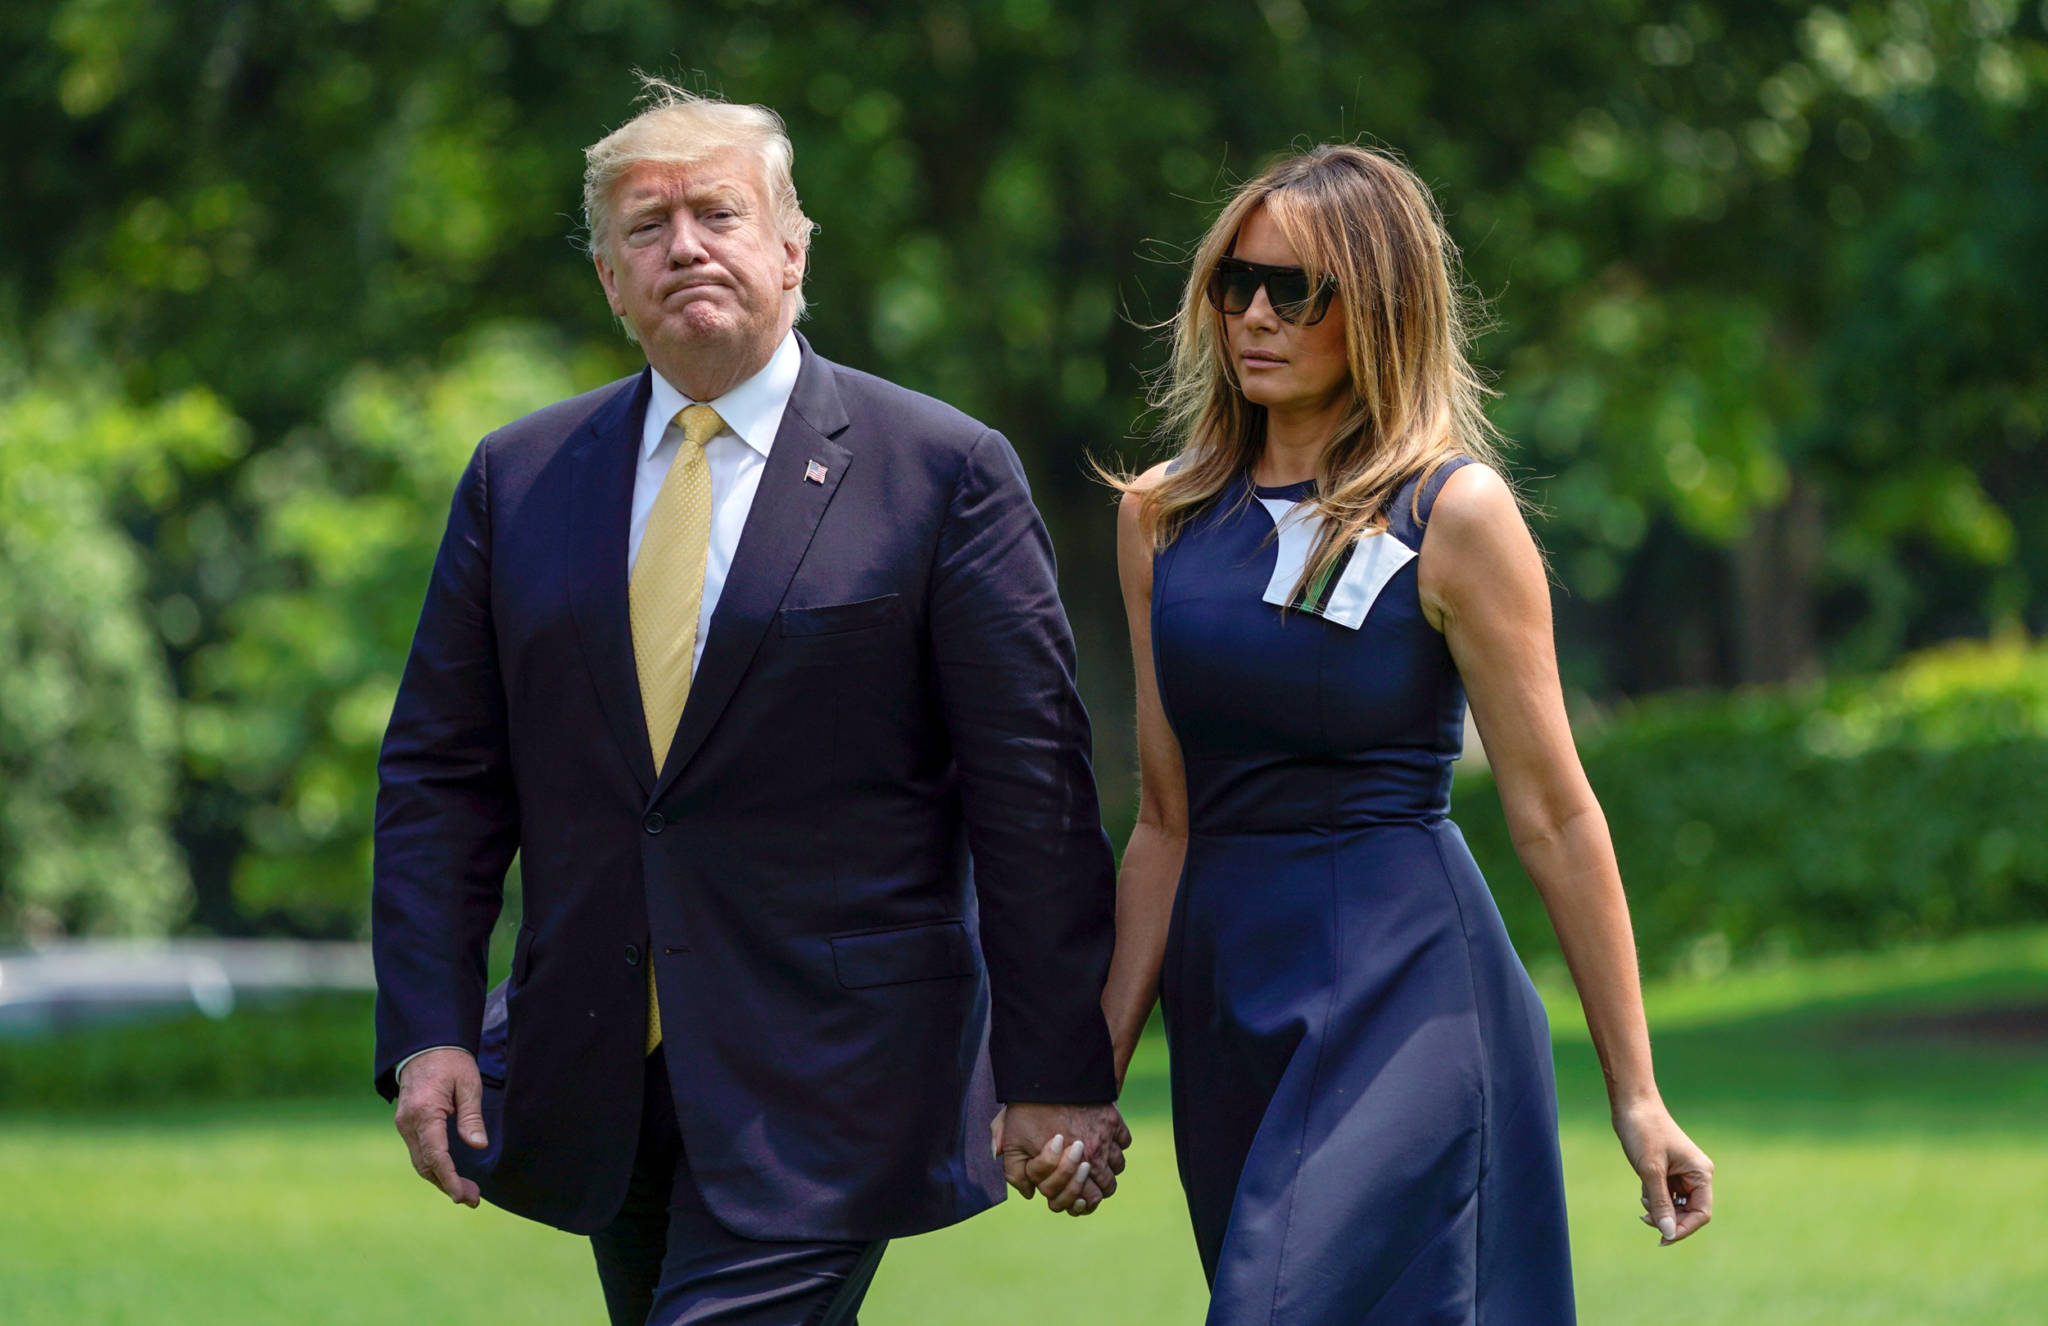 Melania Trump Is Counting The Minutes Until Divorce When Donald Leaves The White House After Lose US Elections